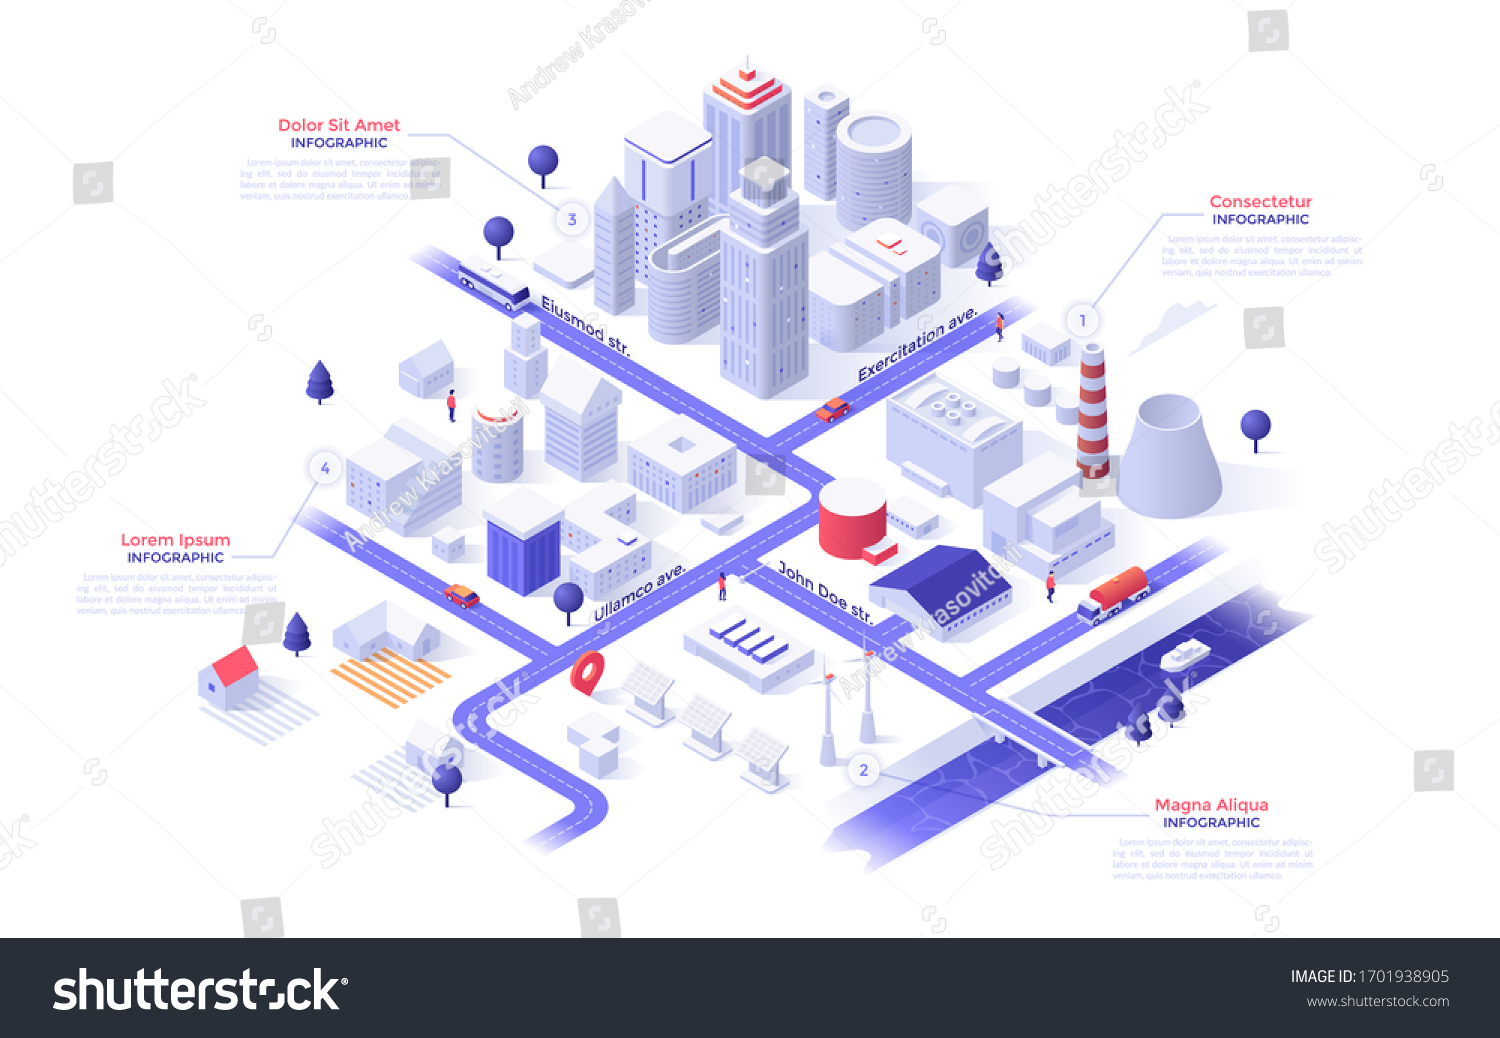 Isometric map of metropolis city with paper white downtown skyscrapers, suburban houses, industrial buildings, power plants, streets, river, bridge. Infographic design template. Vector illustration. #1701938905